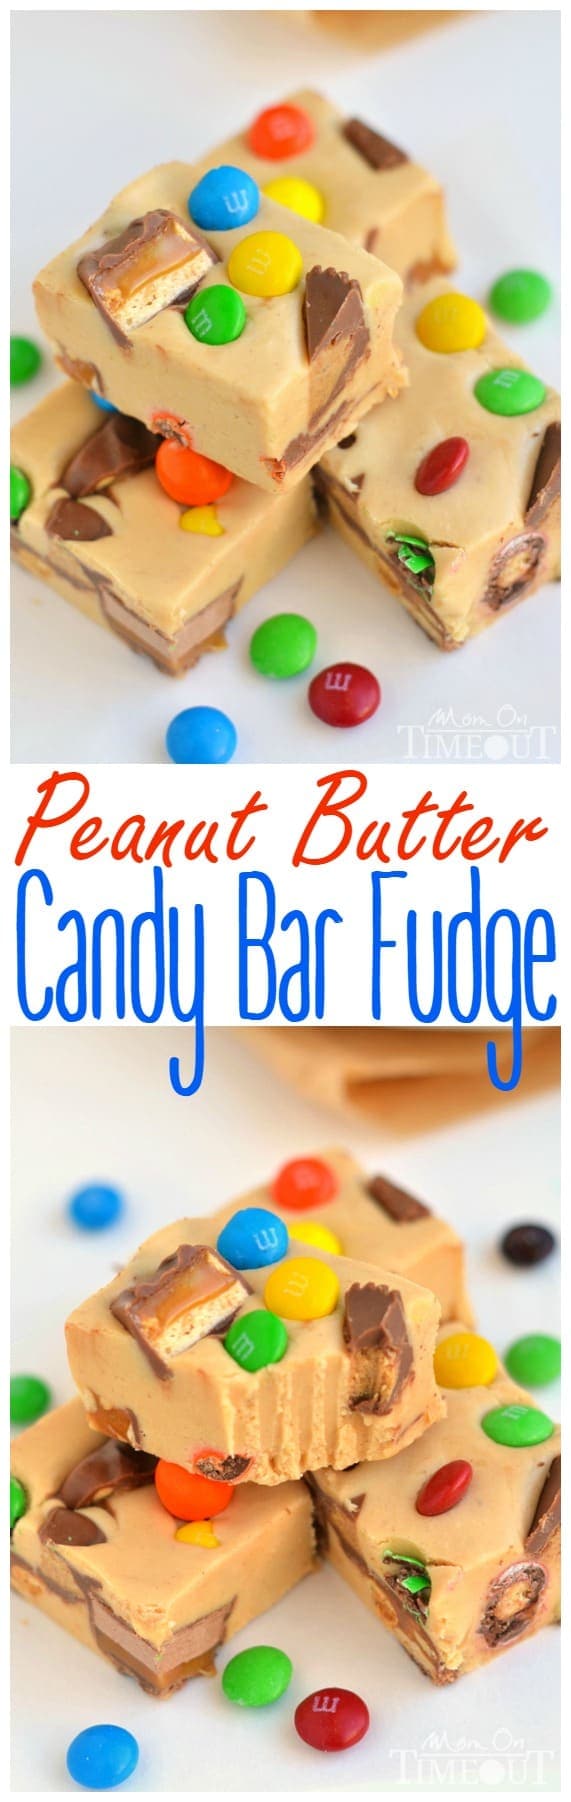 An excellent recipe for using up leftover candy and the perfect way to satisfy your sweet tooth - you simply must try this easy Peanut Butter Candy Bar Fudge recipe! // Mom On Timeout